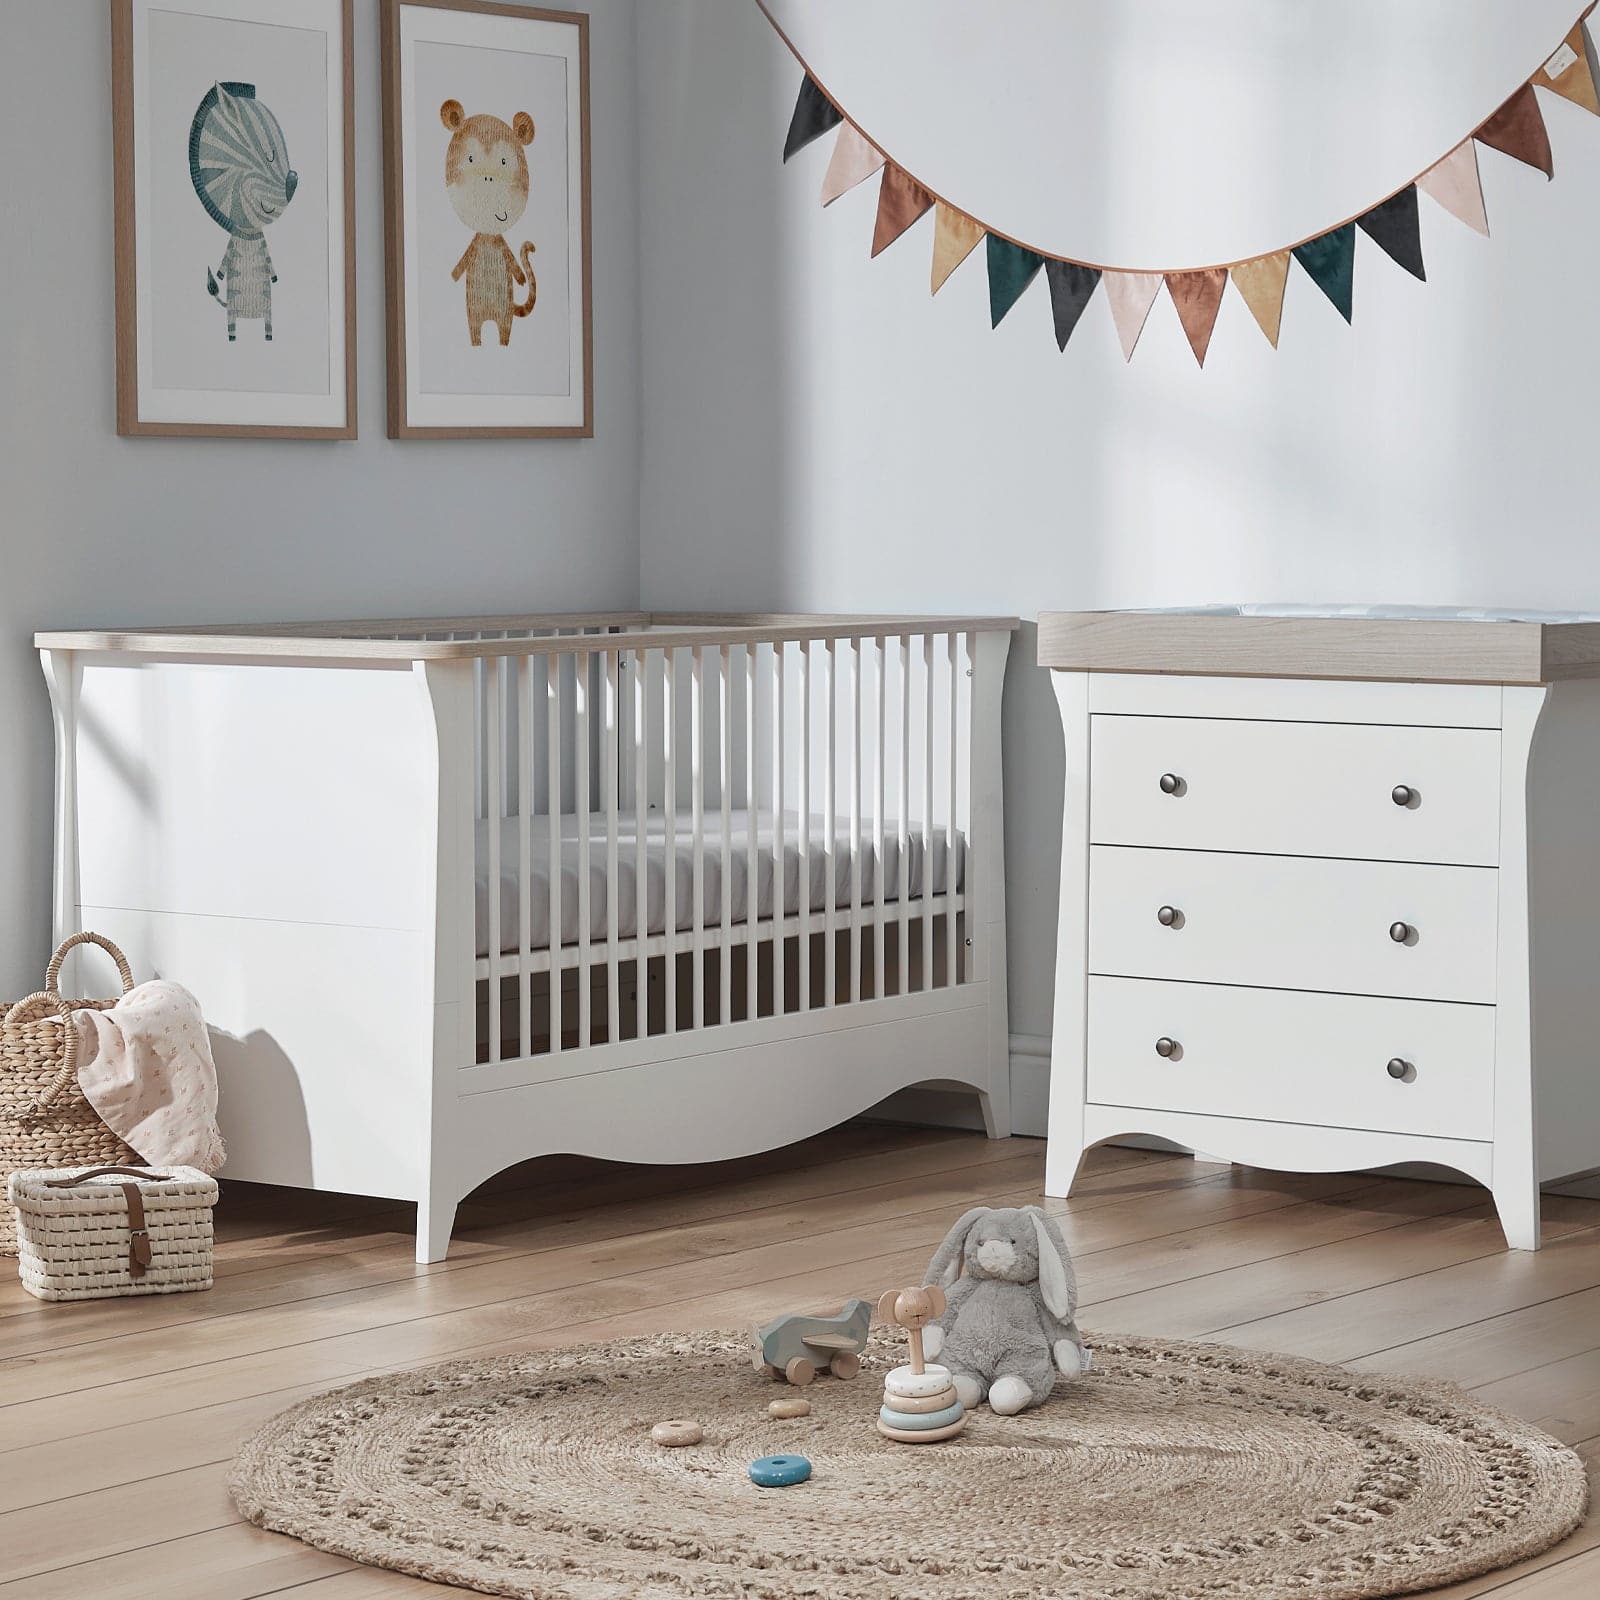 Cuddleco Clara 2 Piece Nursery Furniture Set (Cot Bed & Dresser) - White & Ash -  | For Your Little One